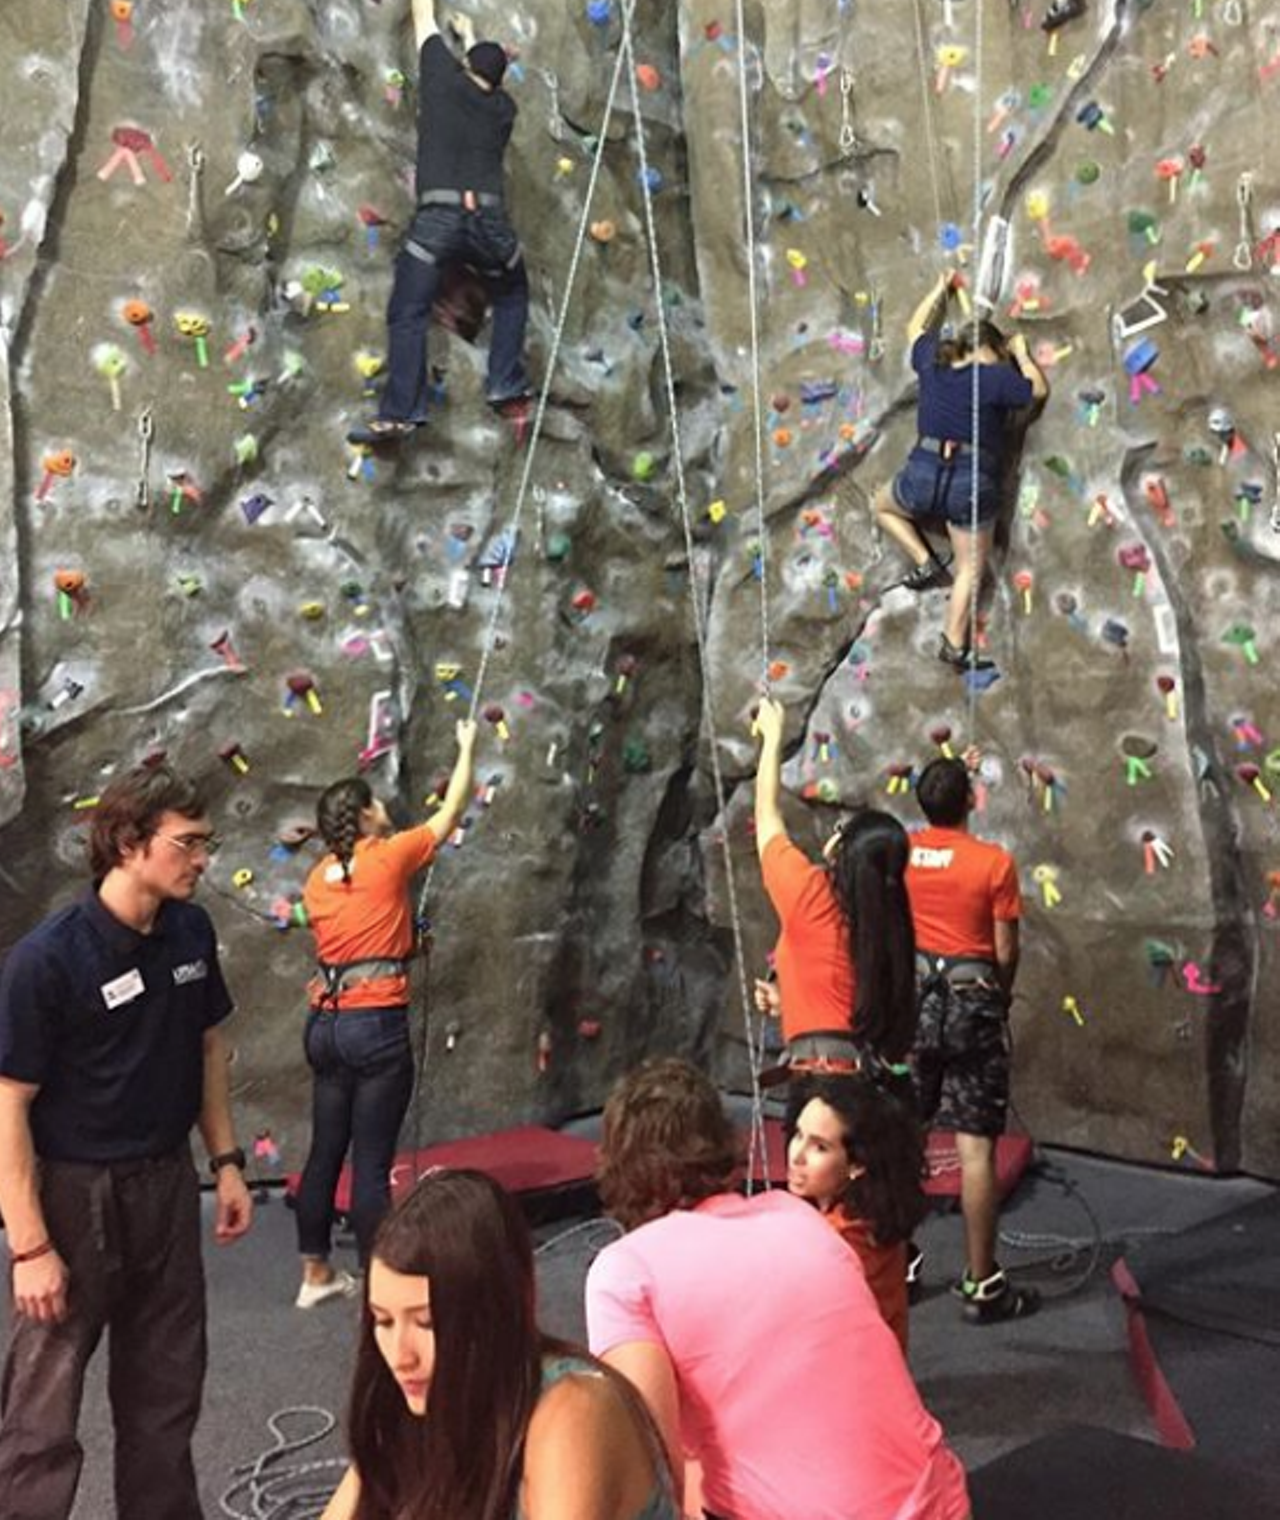 You tried to climb the rock wall in the Rec Center during Orientation
Don’t lie — you tried climbing the rock wall in the rec to impress that cutie in your orientation group. Those other guys made it look so easy.
Photo via Instagram / utsarockclimbing